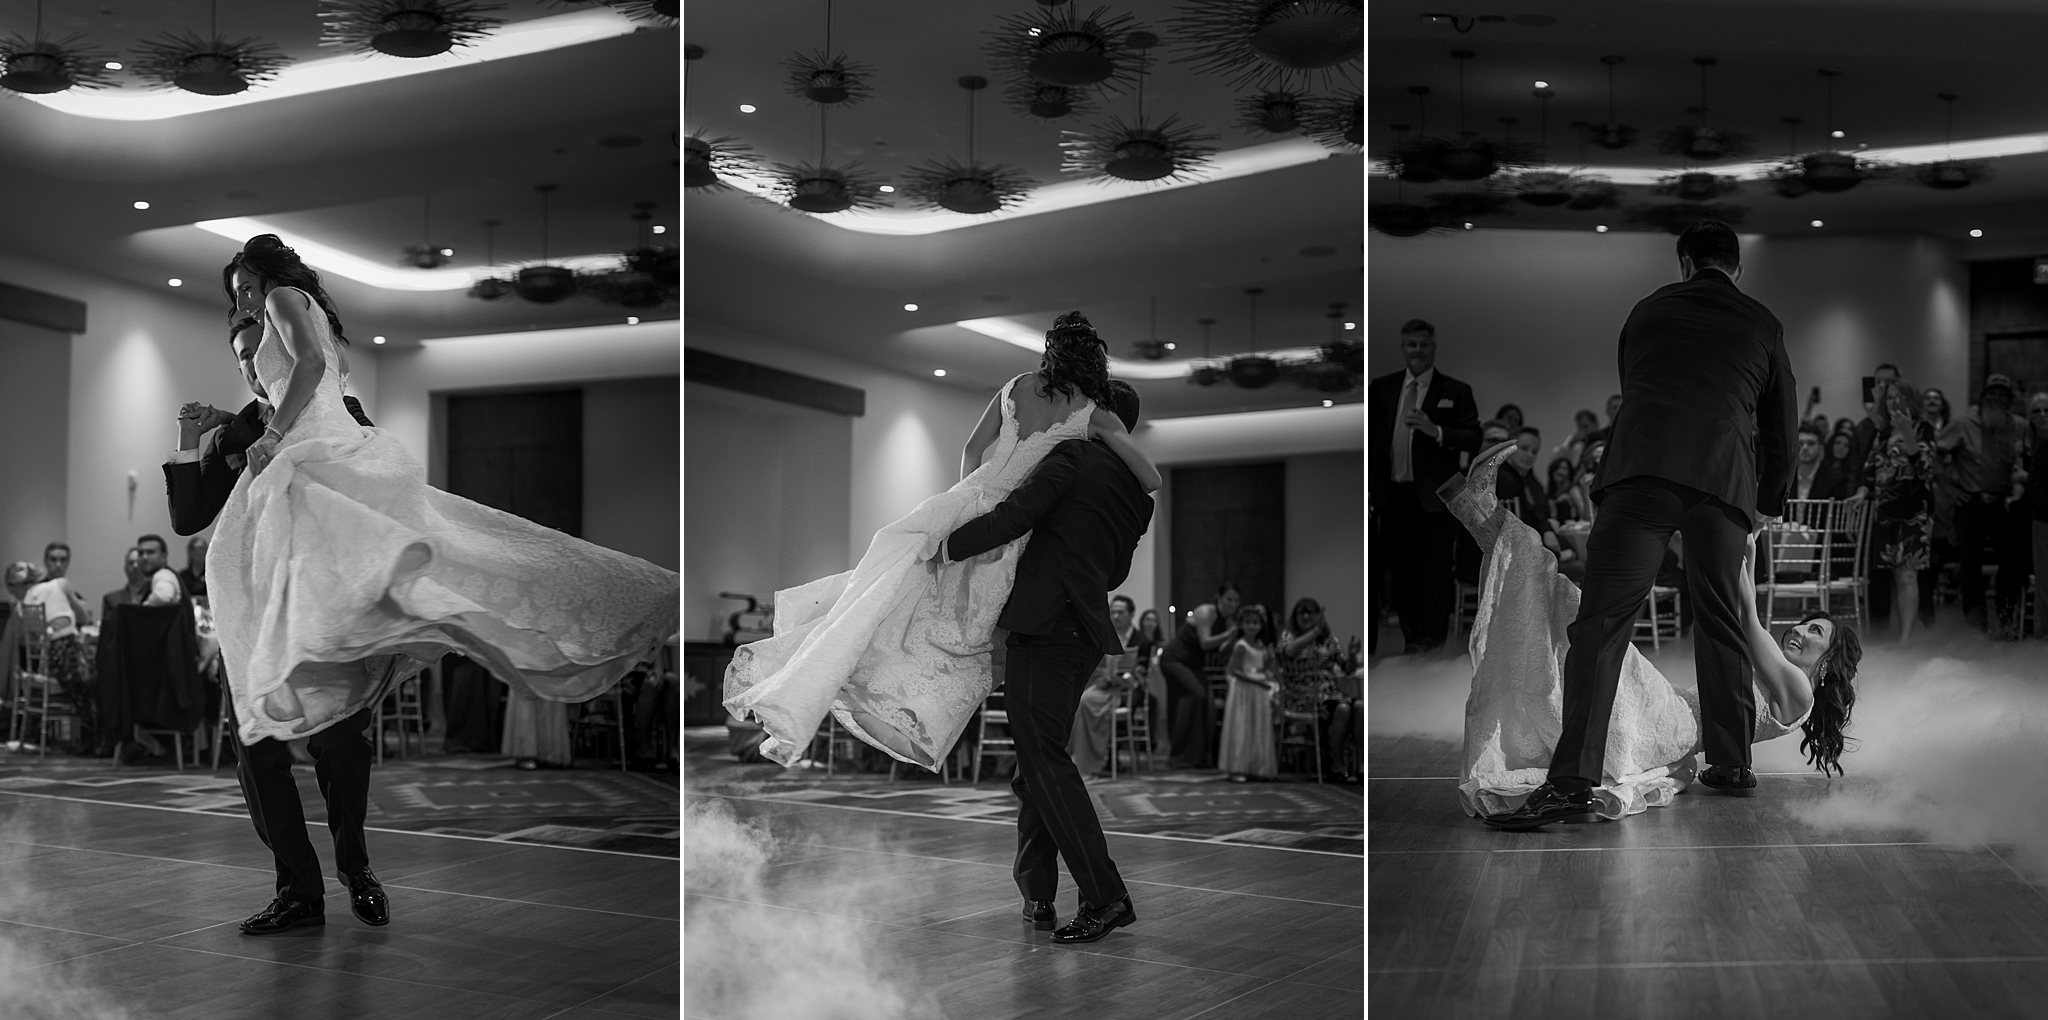 Wedding Reception at the Boulders Resort, Bride and Groom, The Hoskins Photography